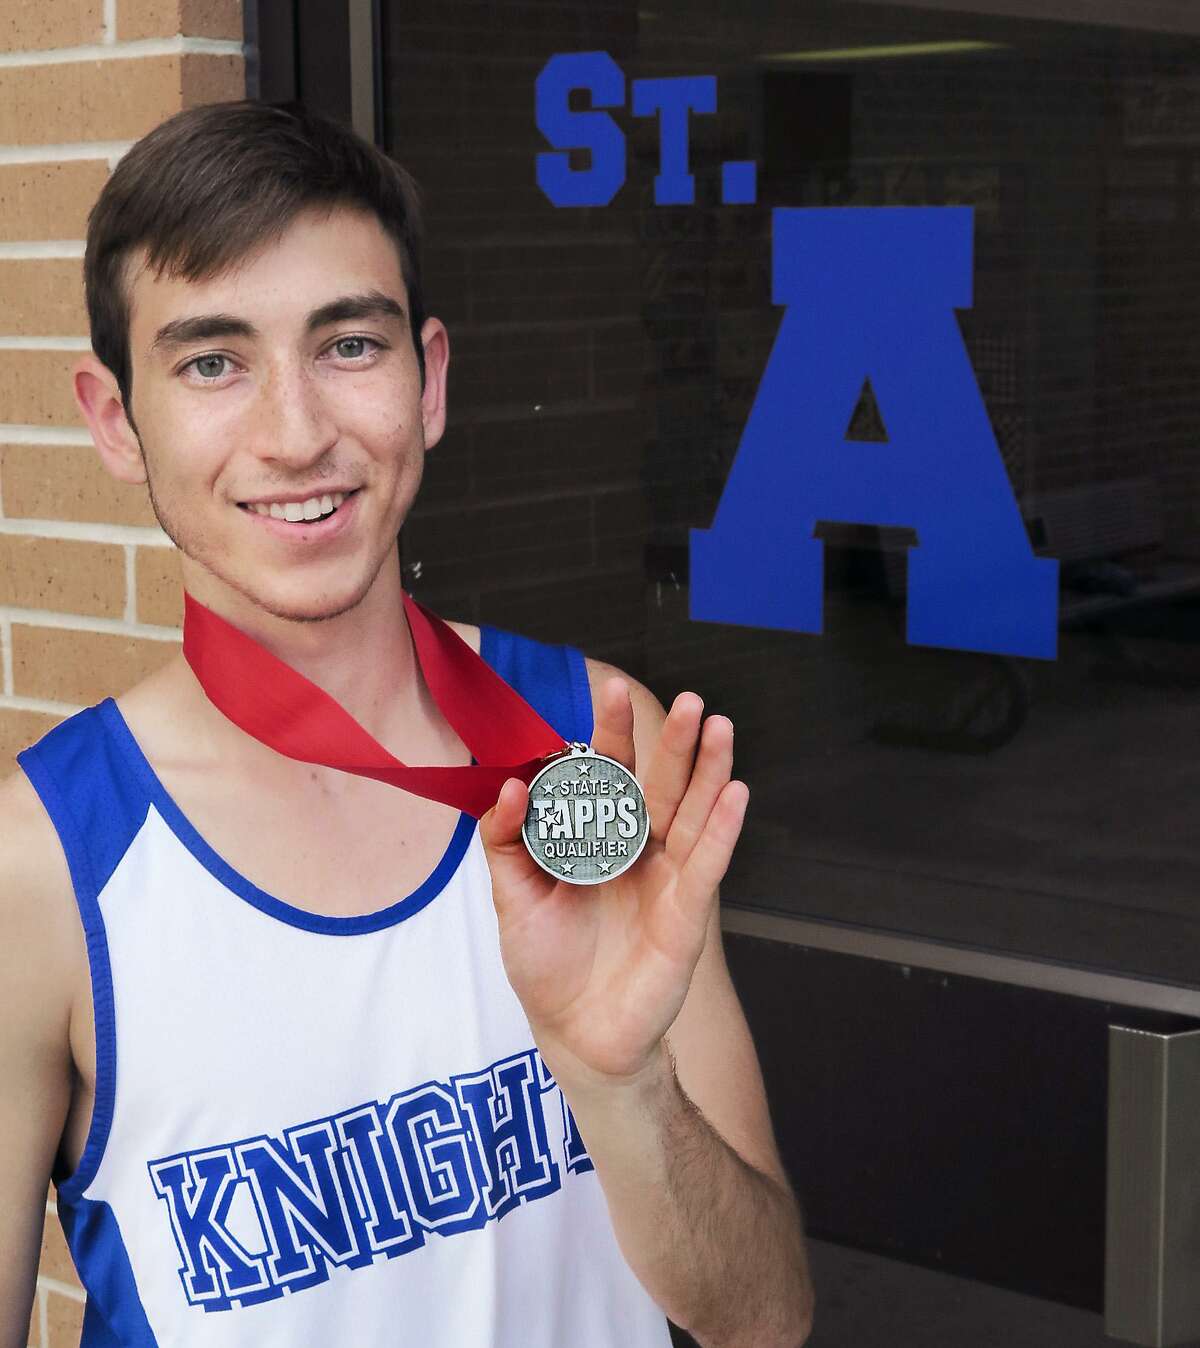 Saint Augustine’s Zachary Jackson will be racing the 3,200-meter run during the TAPPS-5A state meet in Waco.